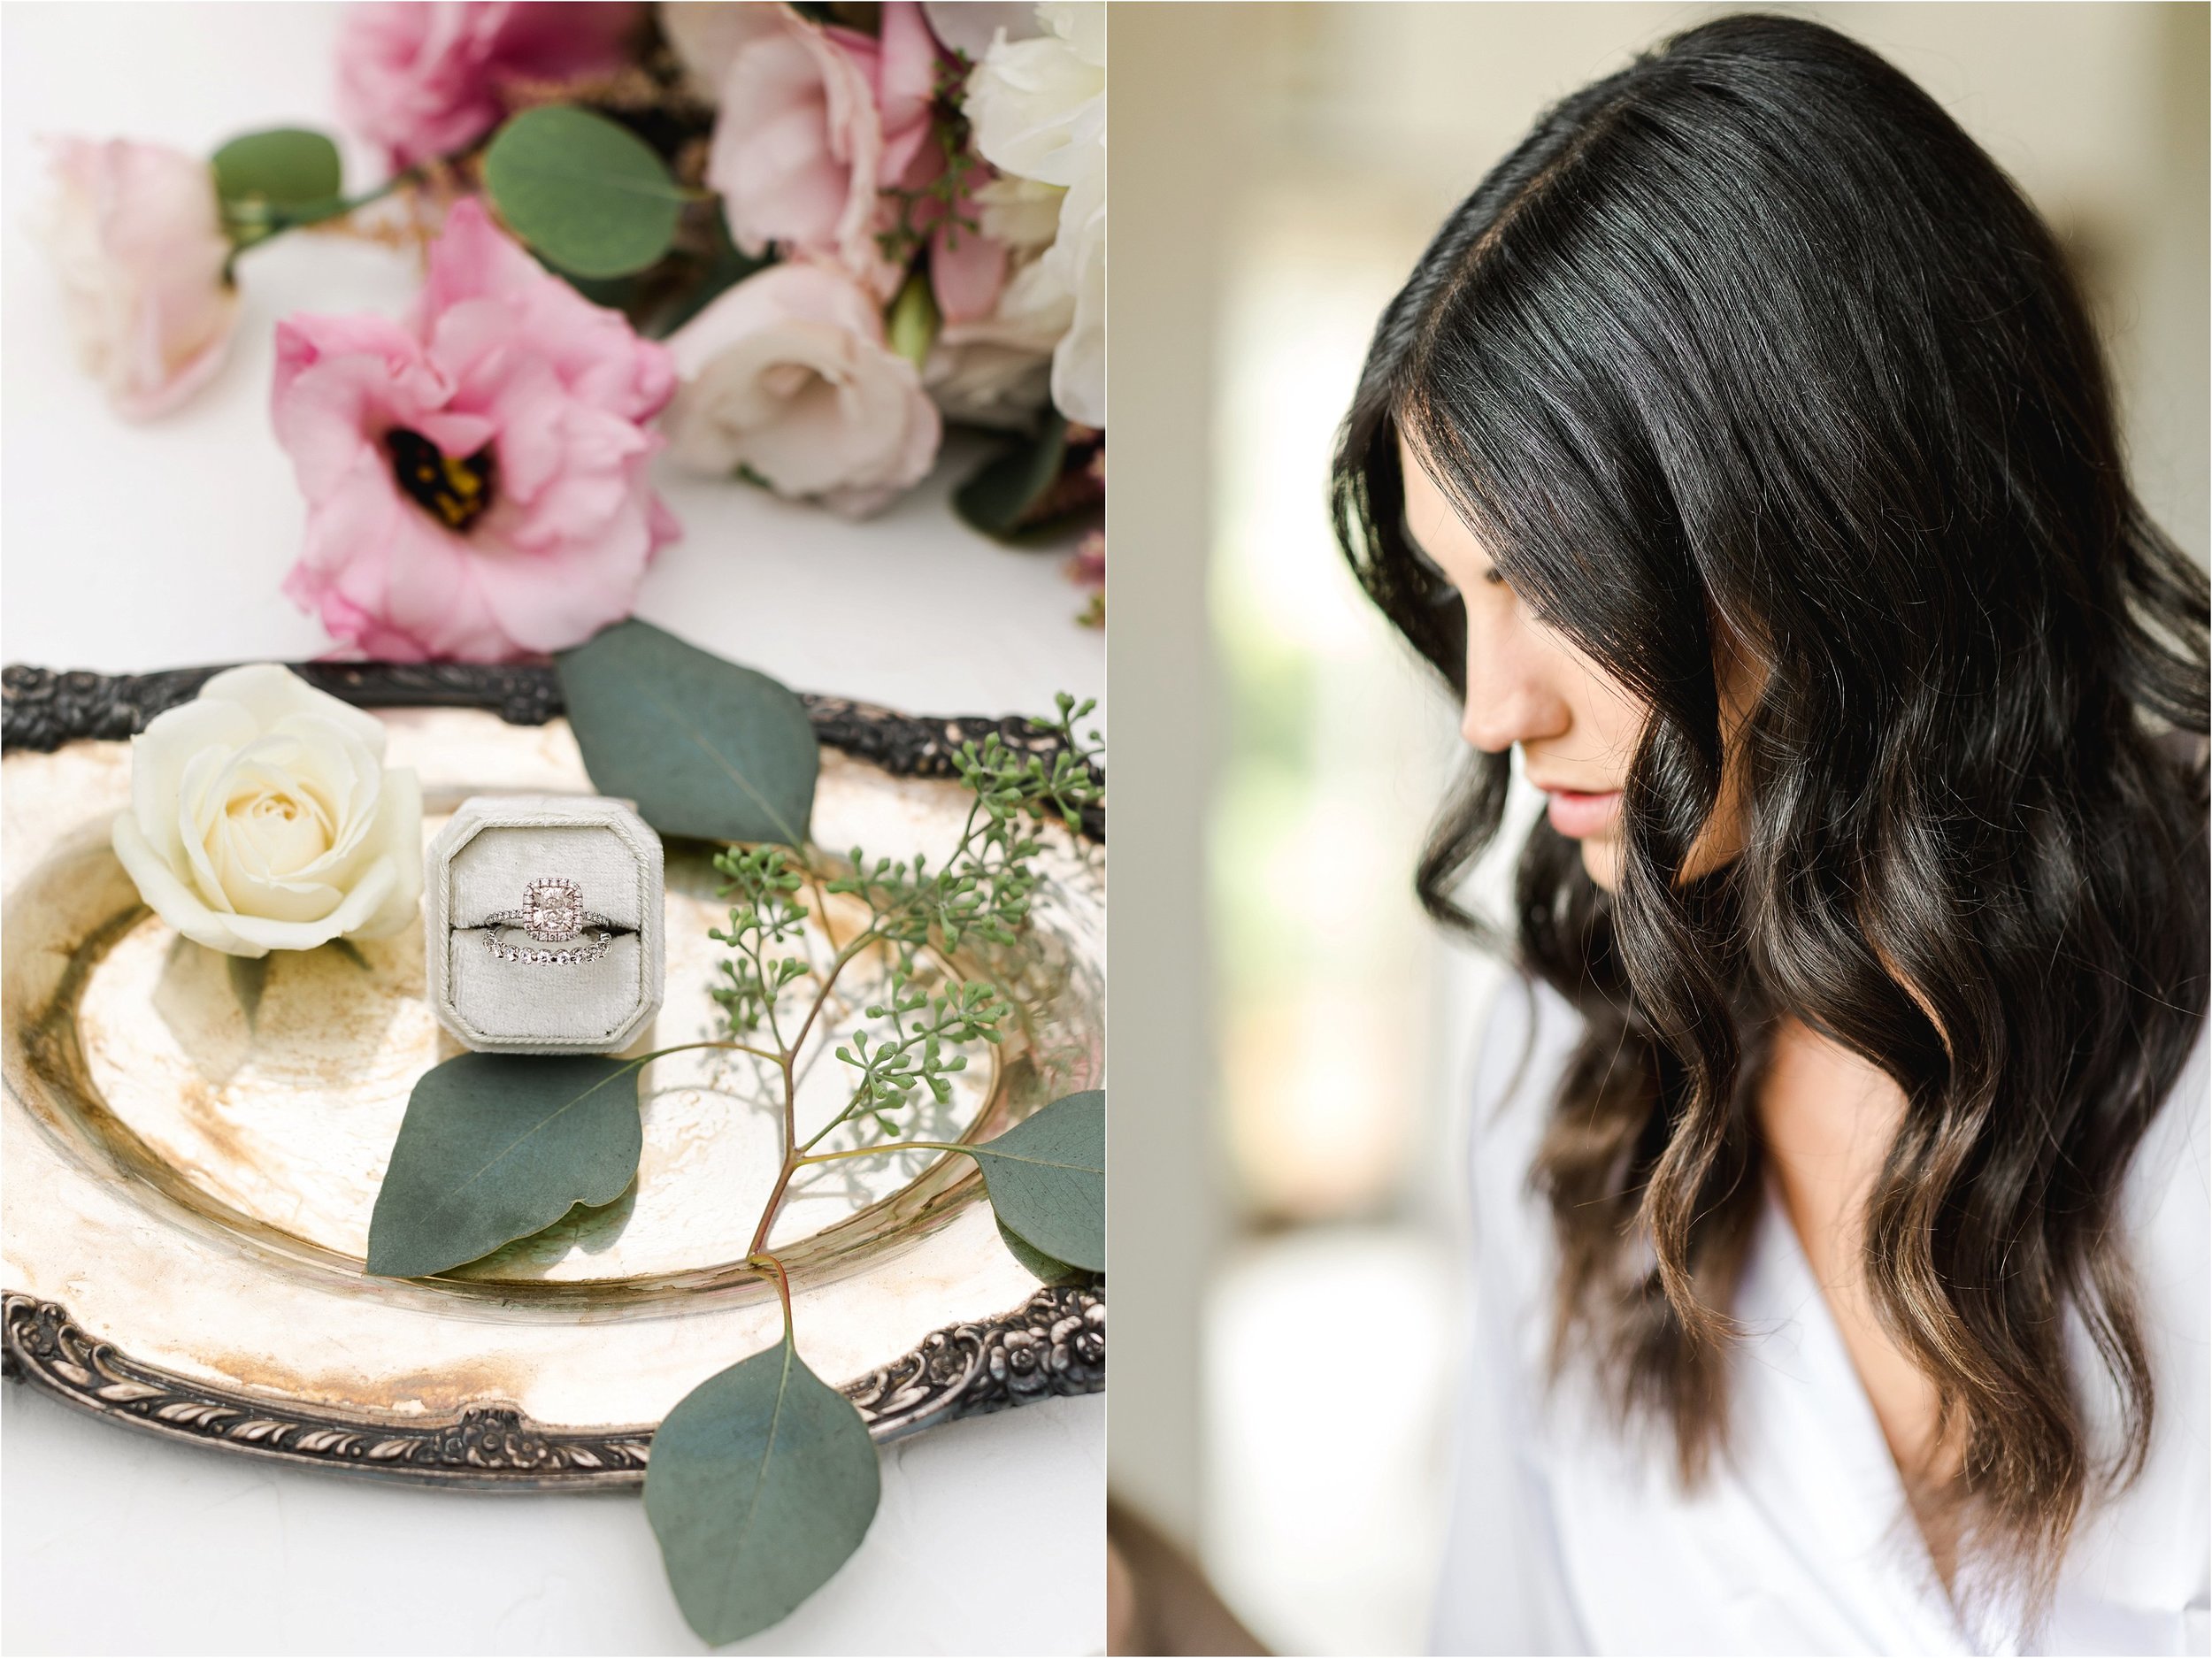 The image on the left shows a flat-lay of the bride's engagement ring and wedding band in a velvet ring box, placed on a round, gold tray surrounded by pink and white florals. eucalyptus leaves and seeded eucalyptus. The image on the right shows a detail shot of the bride's curls.